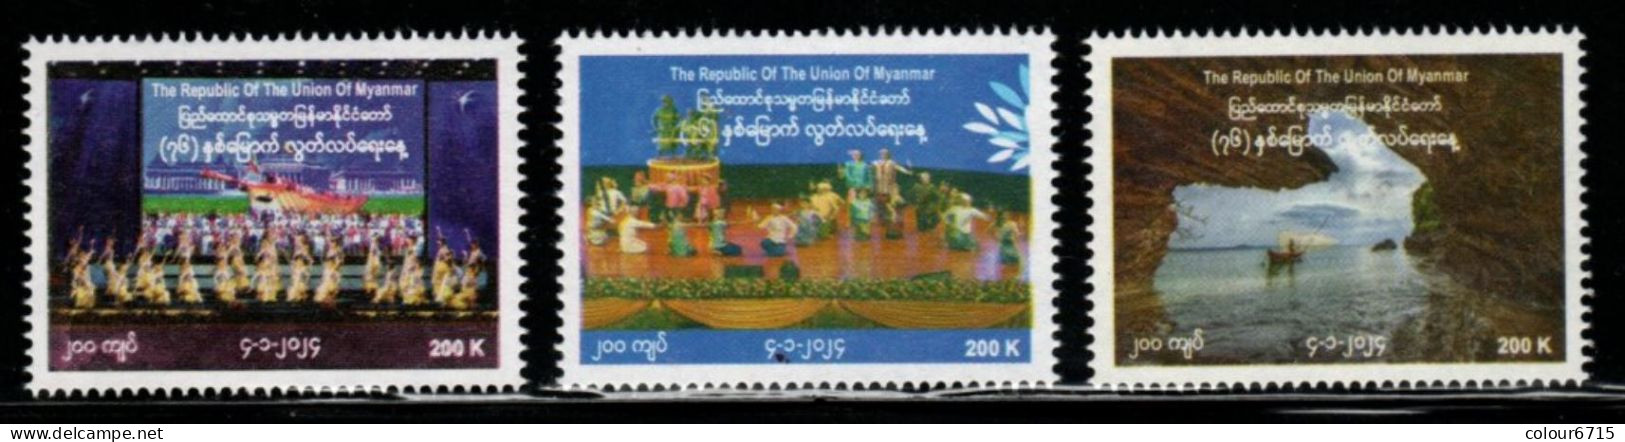 Myanmar 2024 The 76th Anniversary Of Independence Stamps 3v MNH - Myanmar (Birma 1948-...)